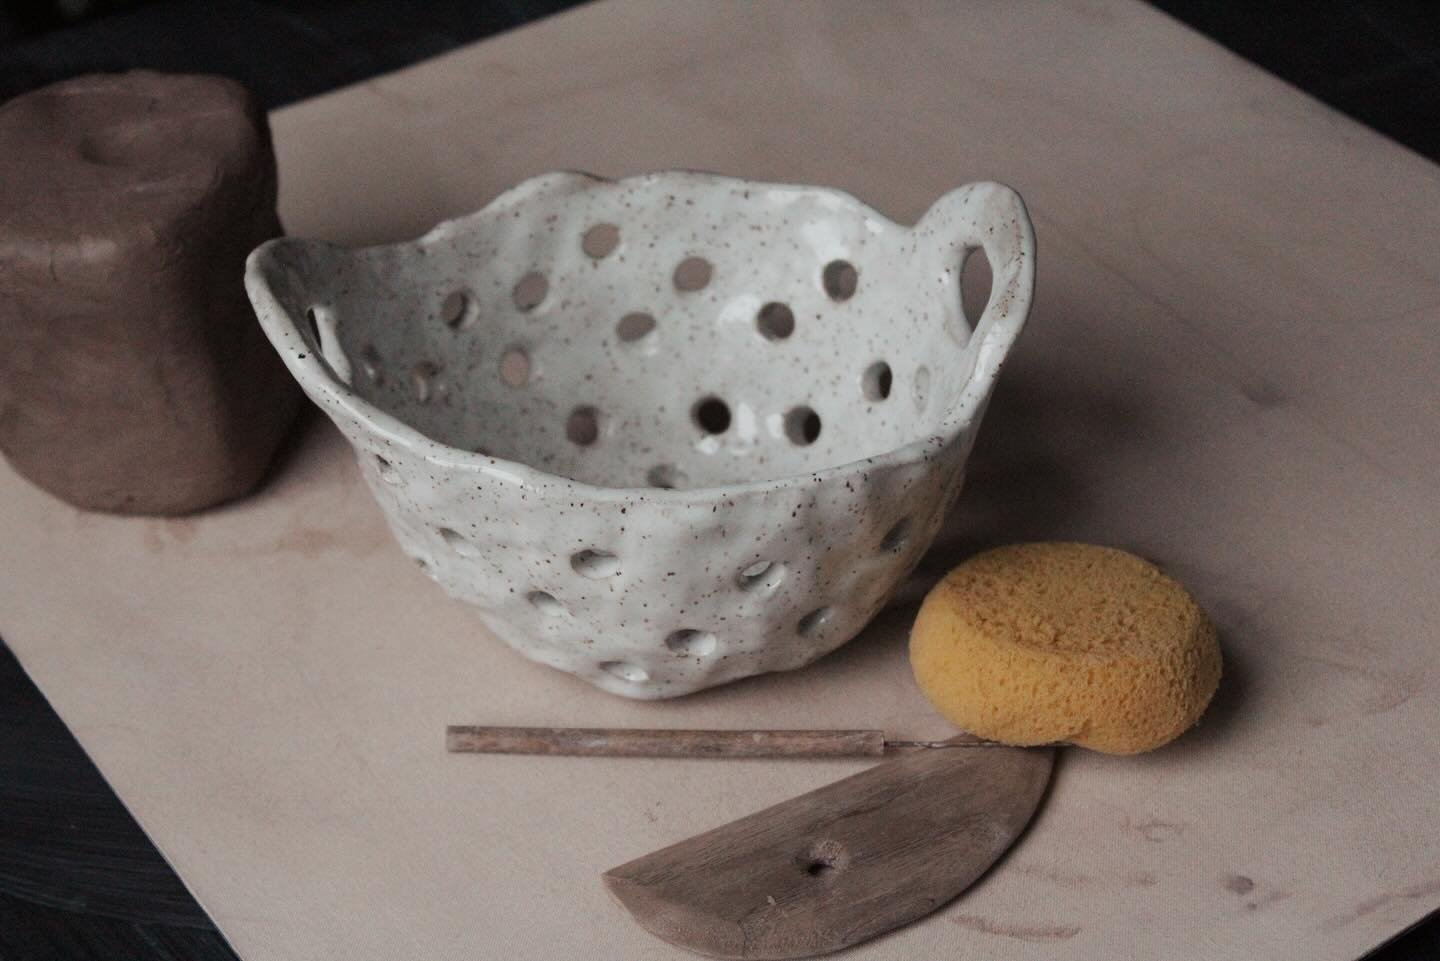 Berry bowls are proven to make you x10 more joyful when eating berries out of them. (source: us)

We added this sweet project to our workshop lineup! 

Join us:

🍓 Thursday, May 23 

Or

🫐 Saturday, June 15

#pottery #learnpottery #pinchpots #dayto